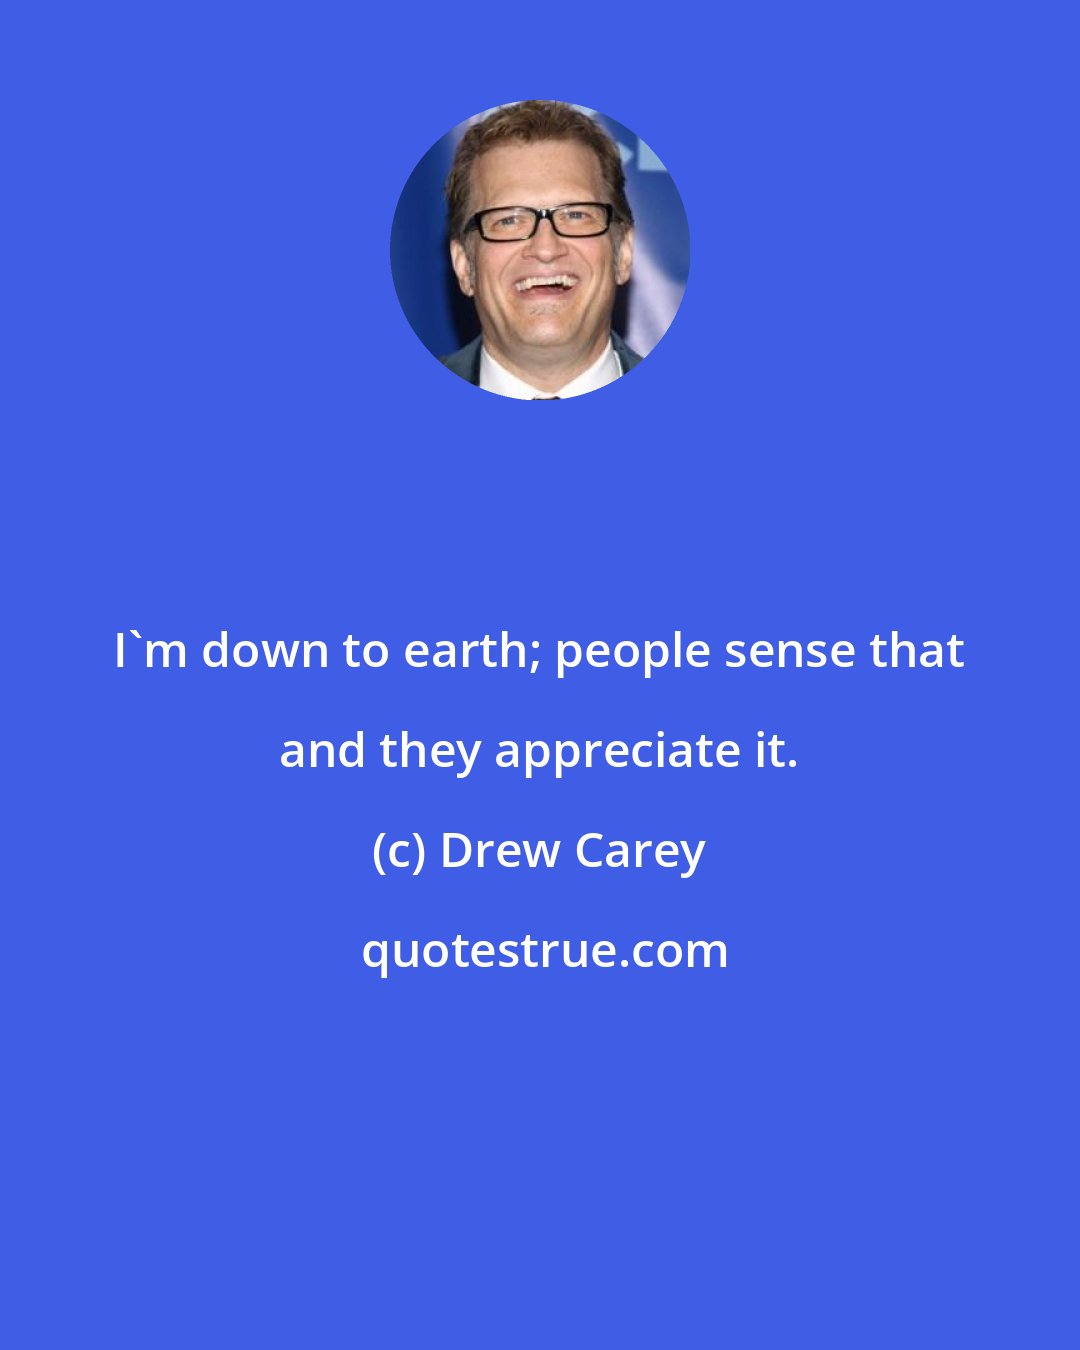 Drew Carey: I'm down to earth; people sense that and they appreciate it.